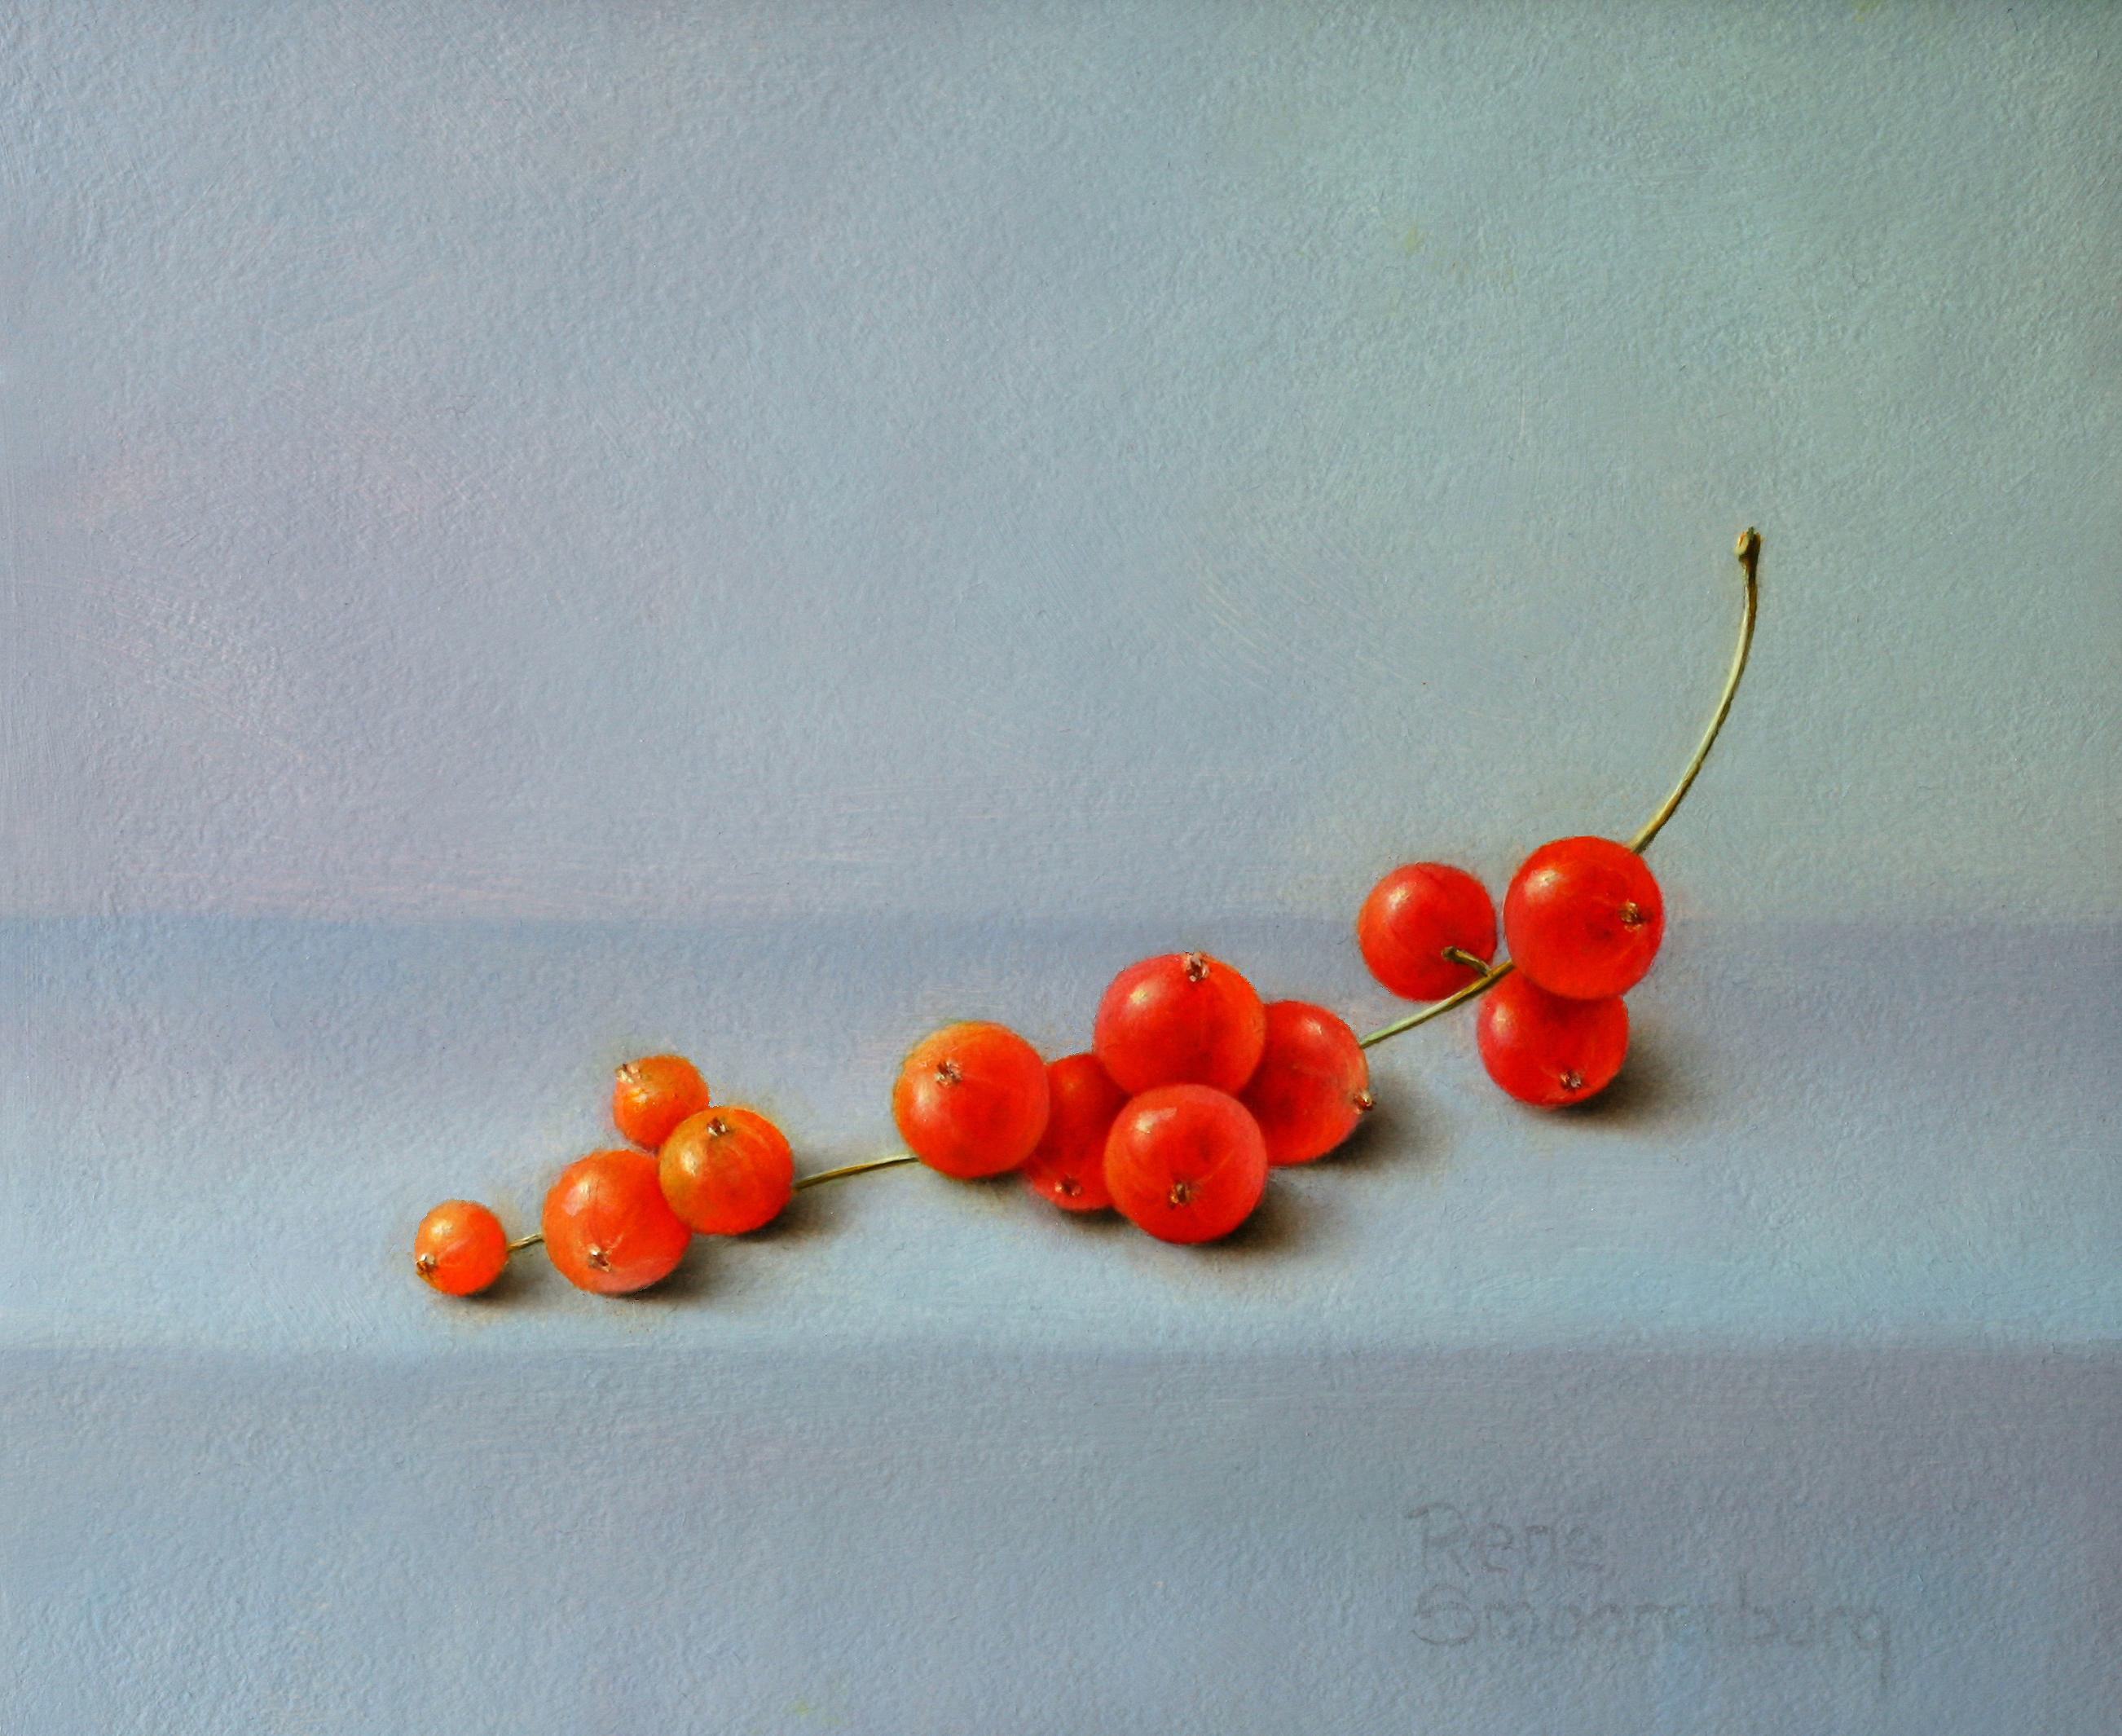 René Smoorenburg  Figurative Painting - "Red Berries" Contemporary Fine Dutch Realist Still-Life Painting of Fruit